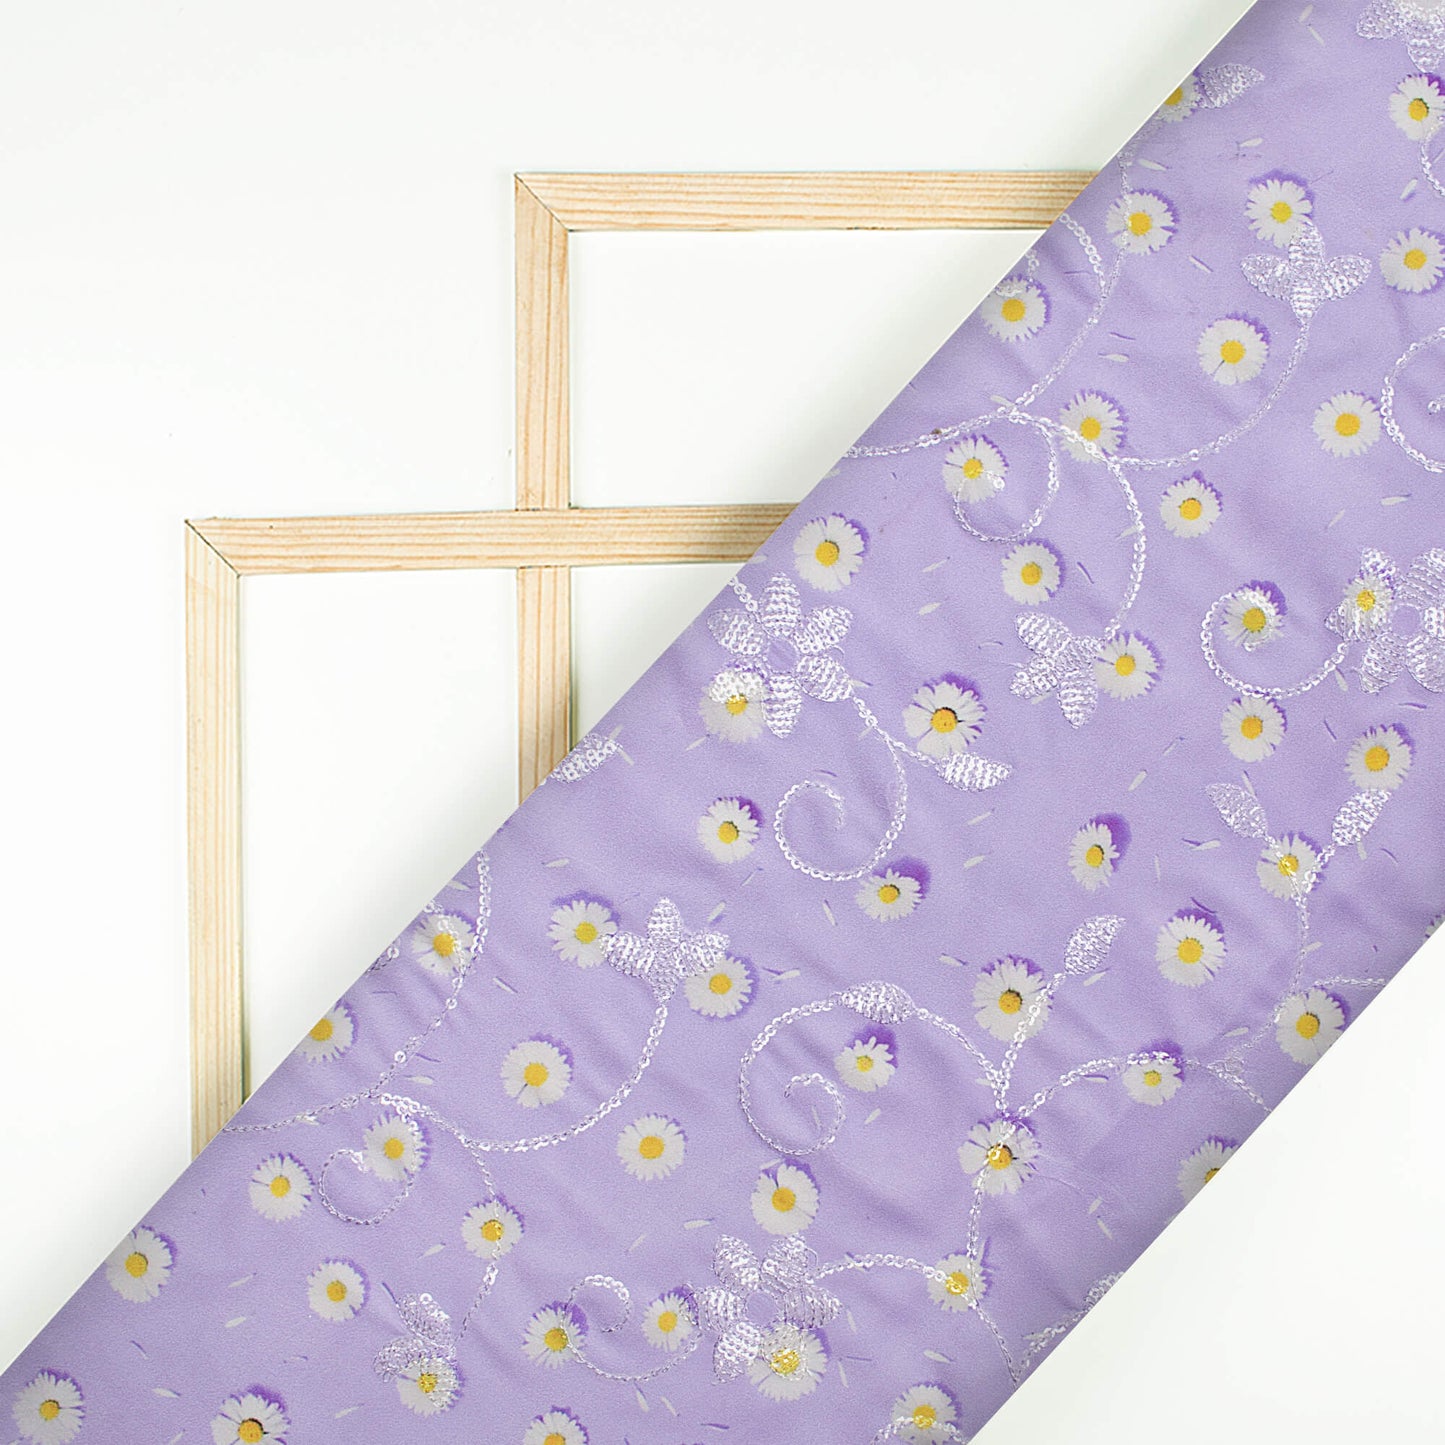 Light Purple And Daisy White Floral Pattern Digital Print Floral Sequins Embroidery Ultra Premium Butter Crepe Fabric